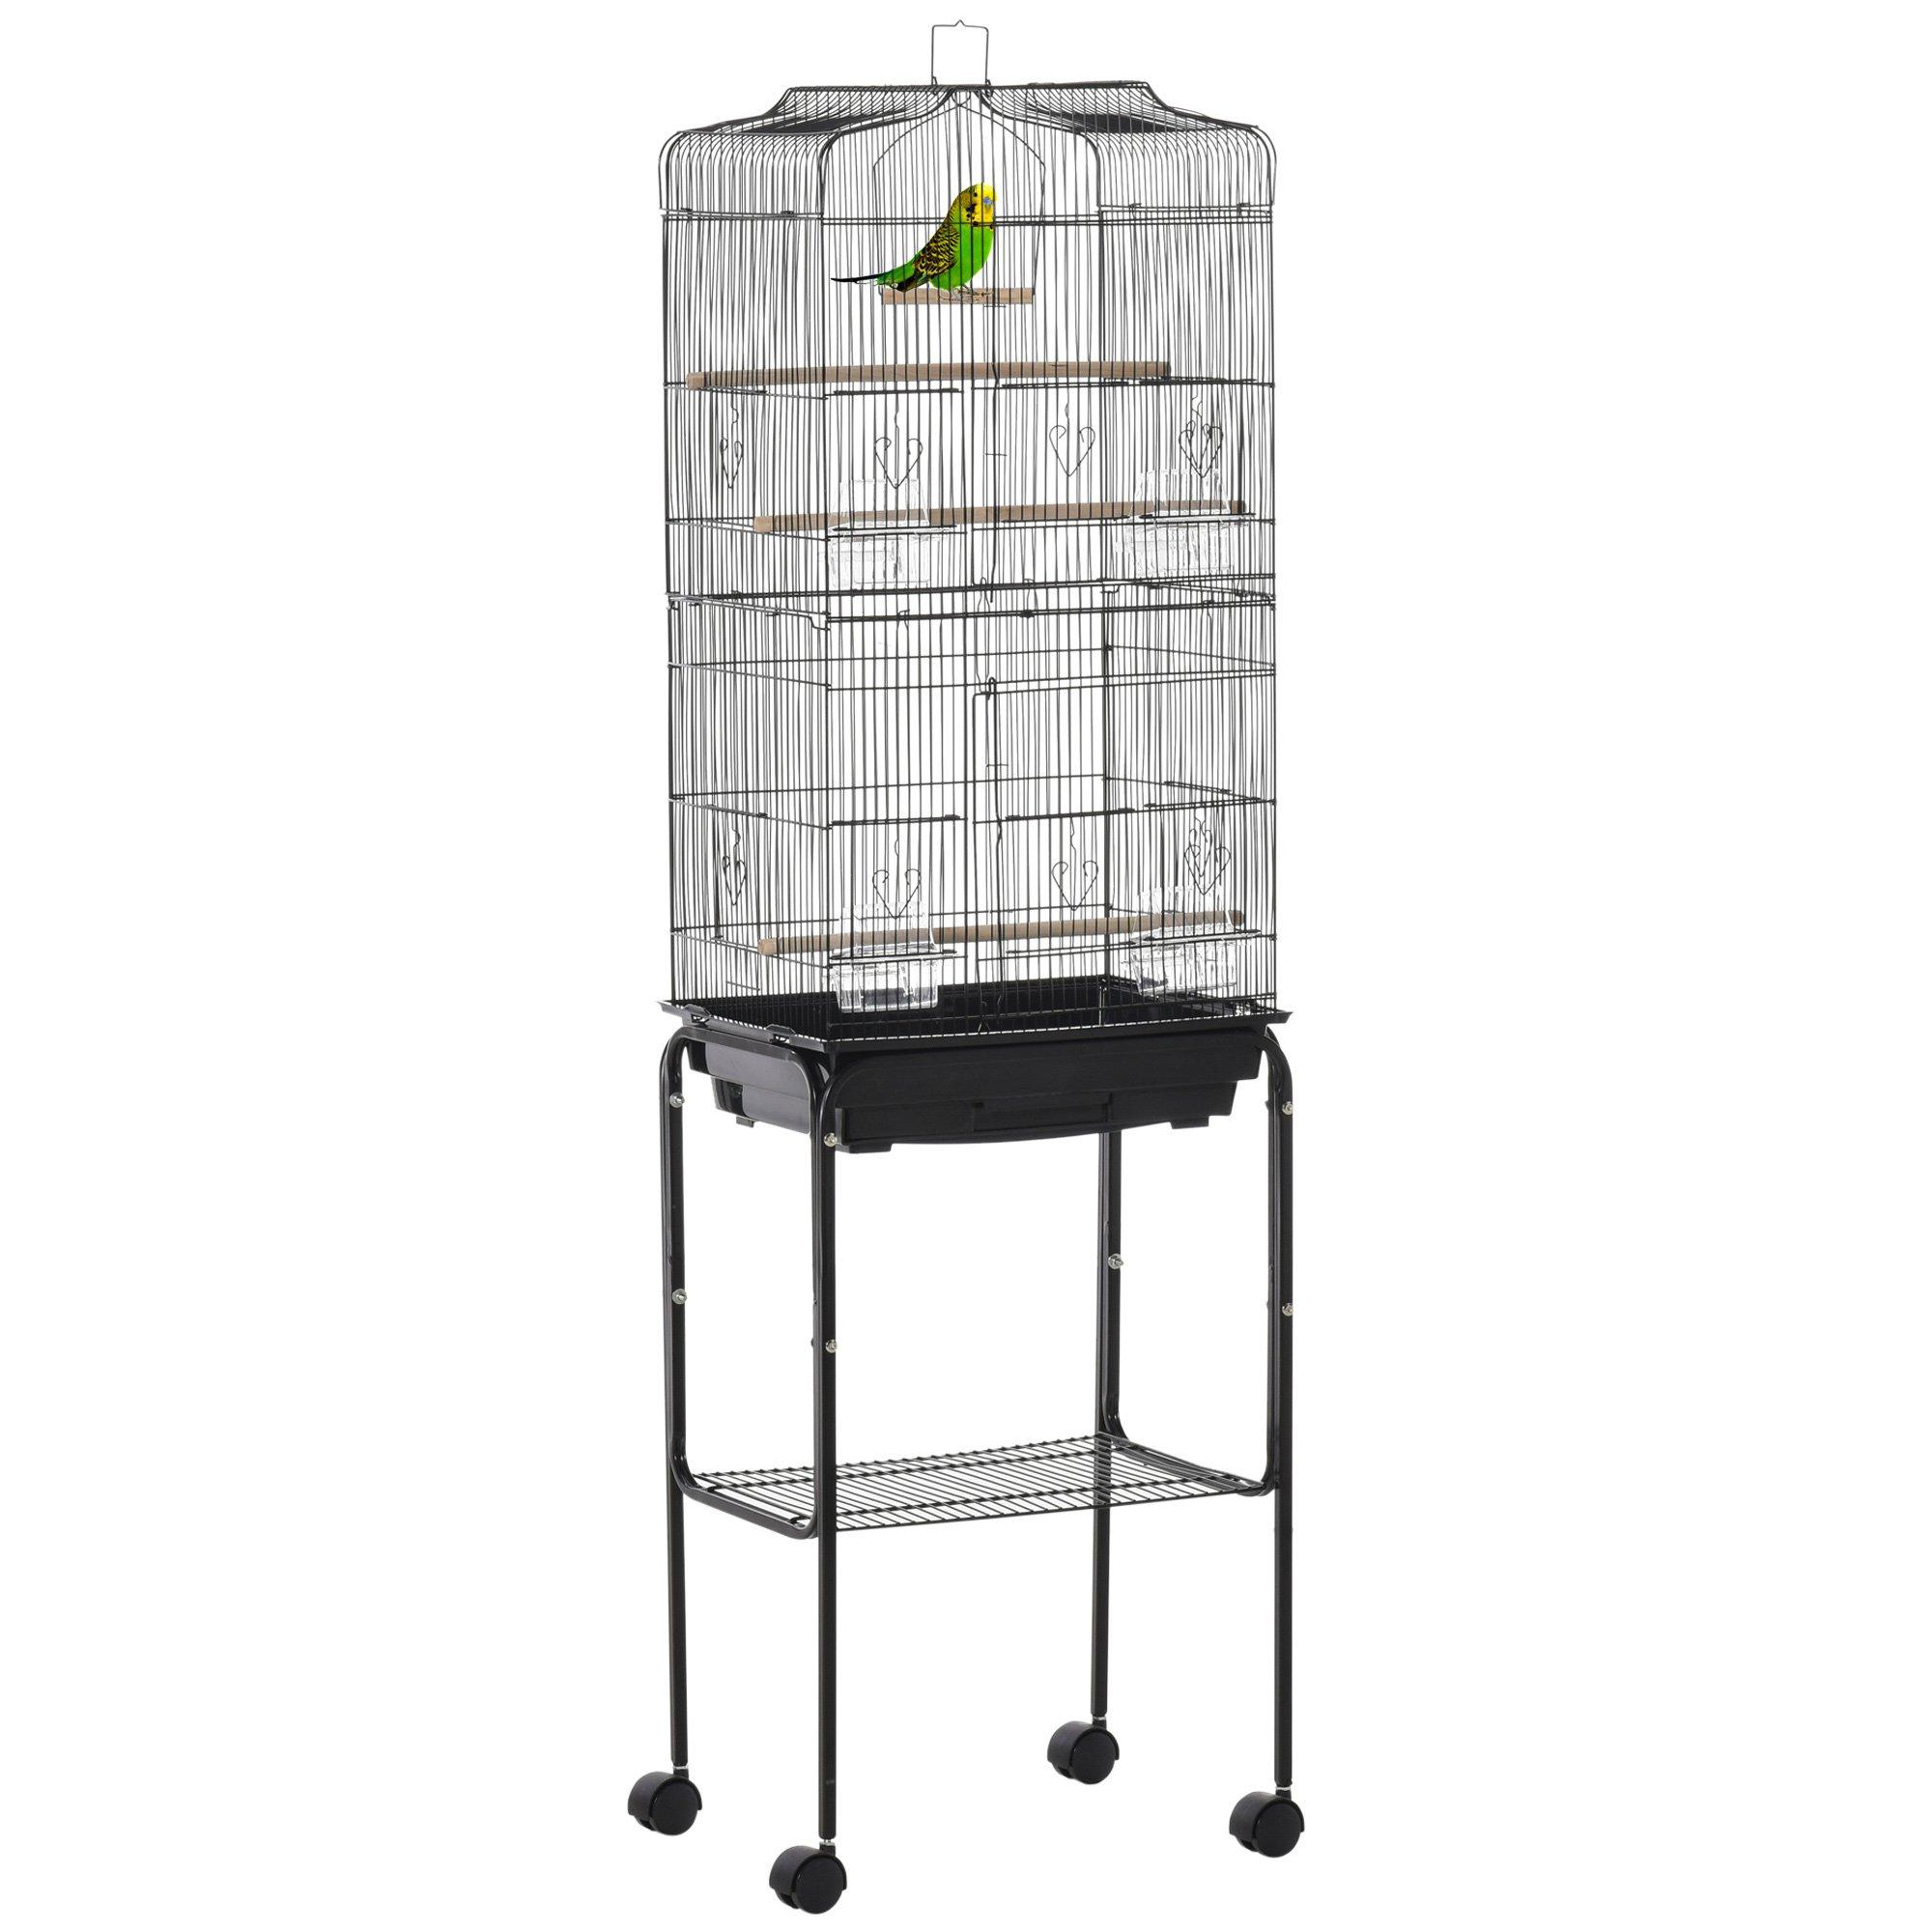 Bird Cage Metal Budgie Cages with Rolling Stand Slide-out Tray Storage Shelf